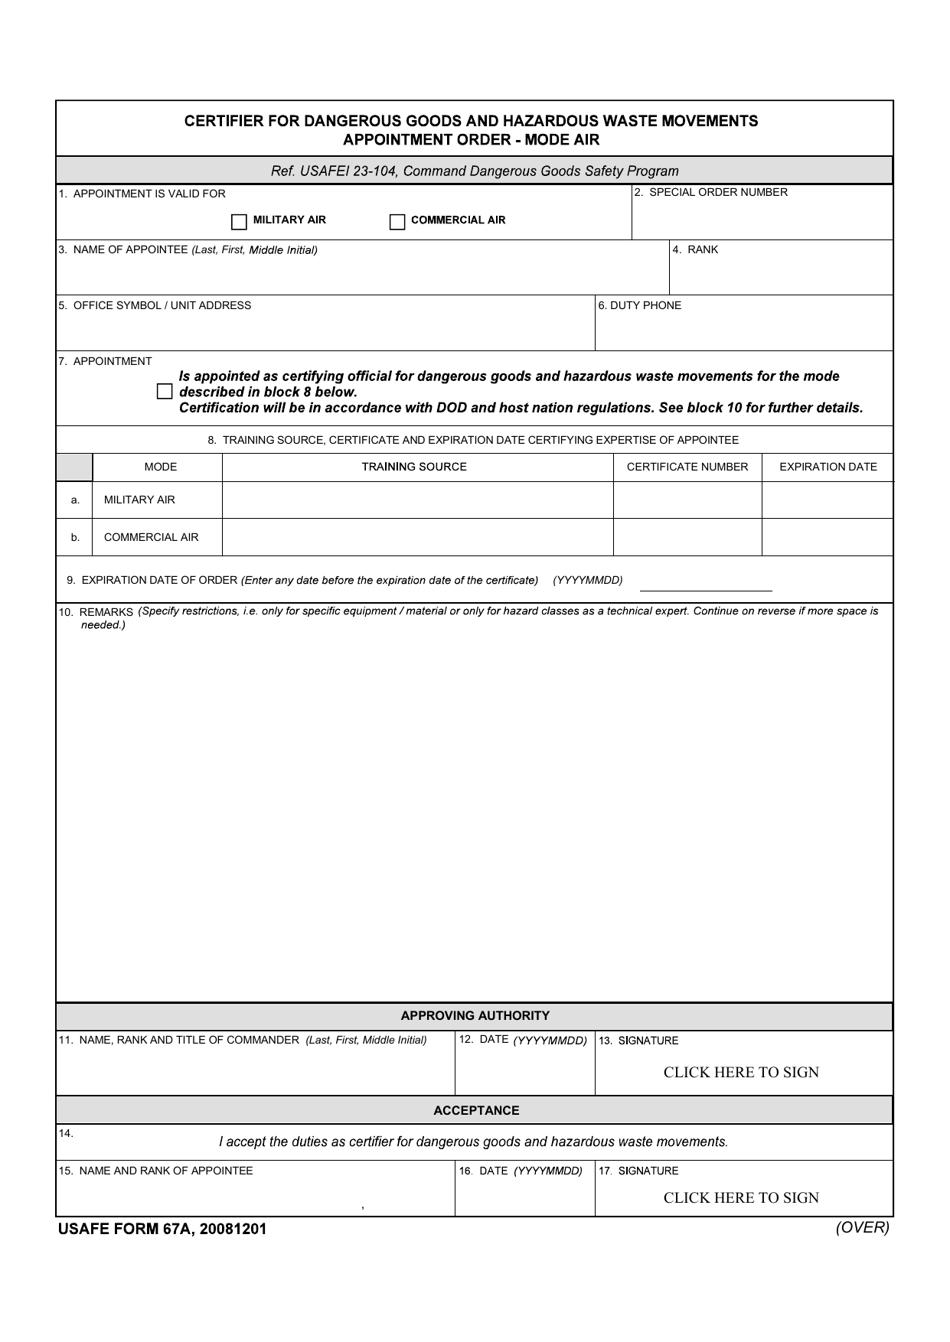 USAFE Form 67A Certifier for Dangous Goods and Hazardous Waste Movements Appointment Order - Mode Air, Page 1